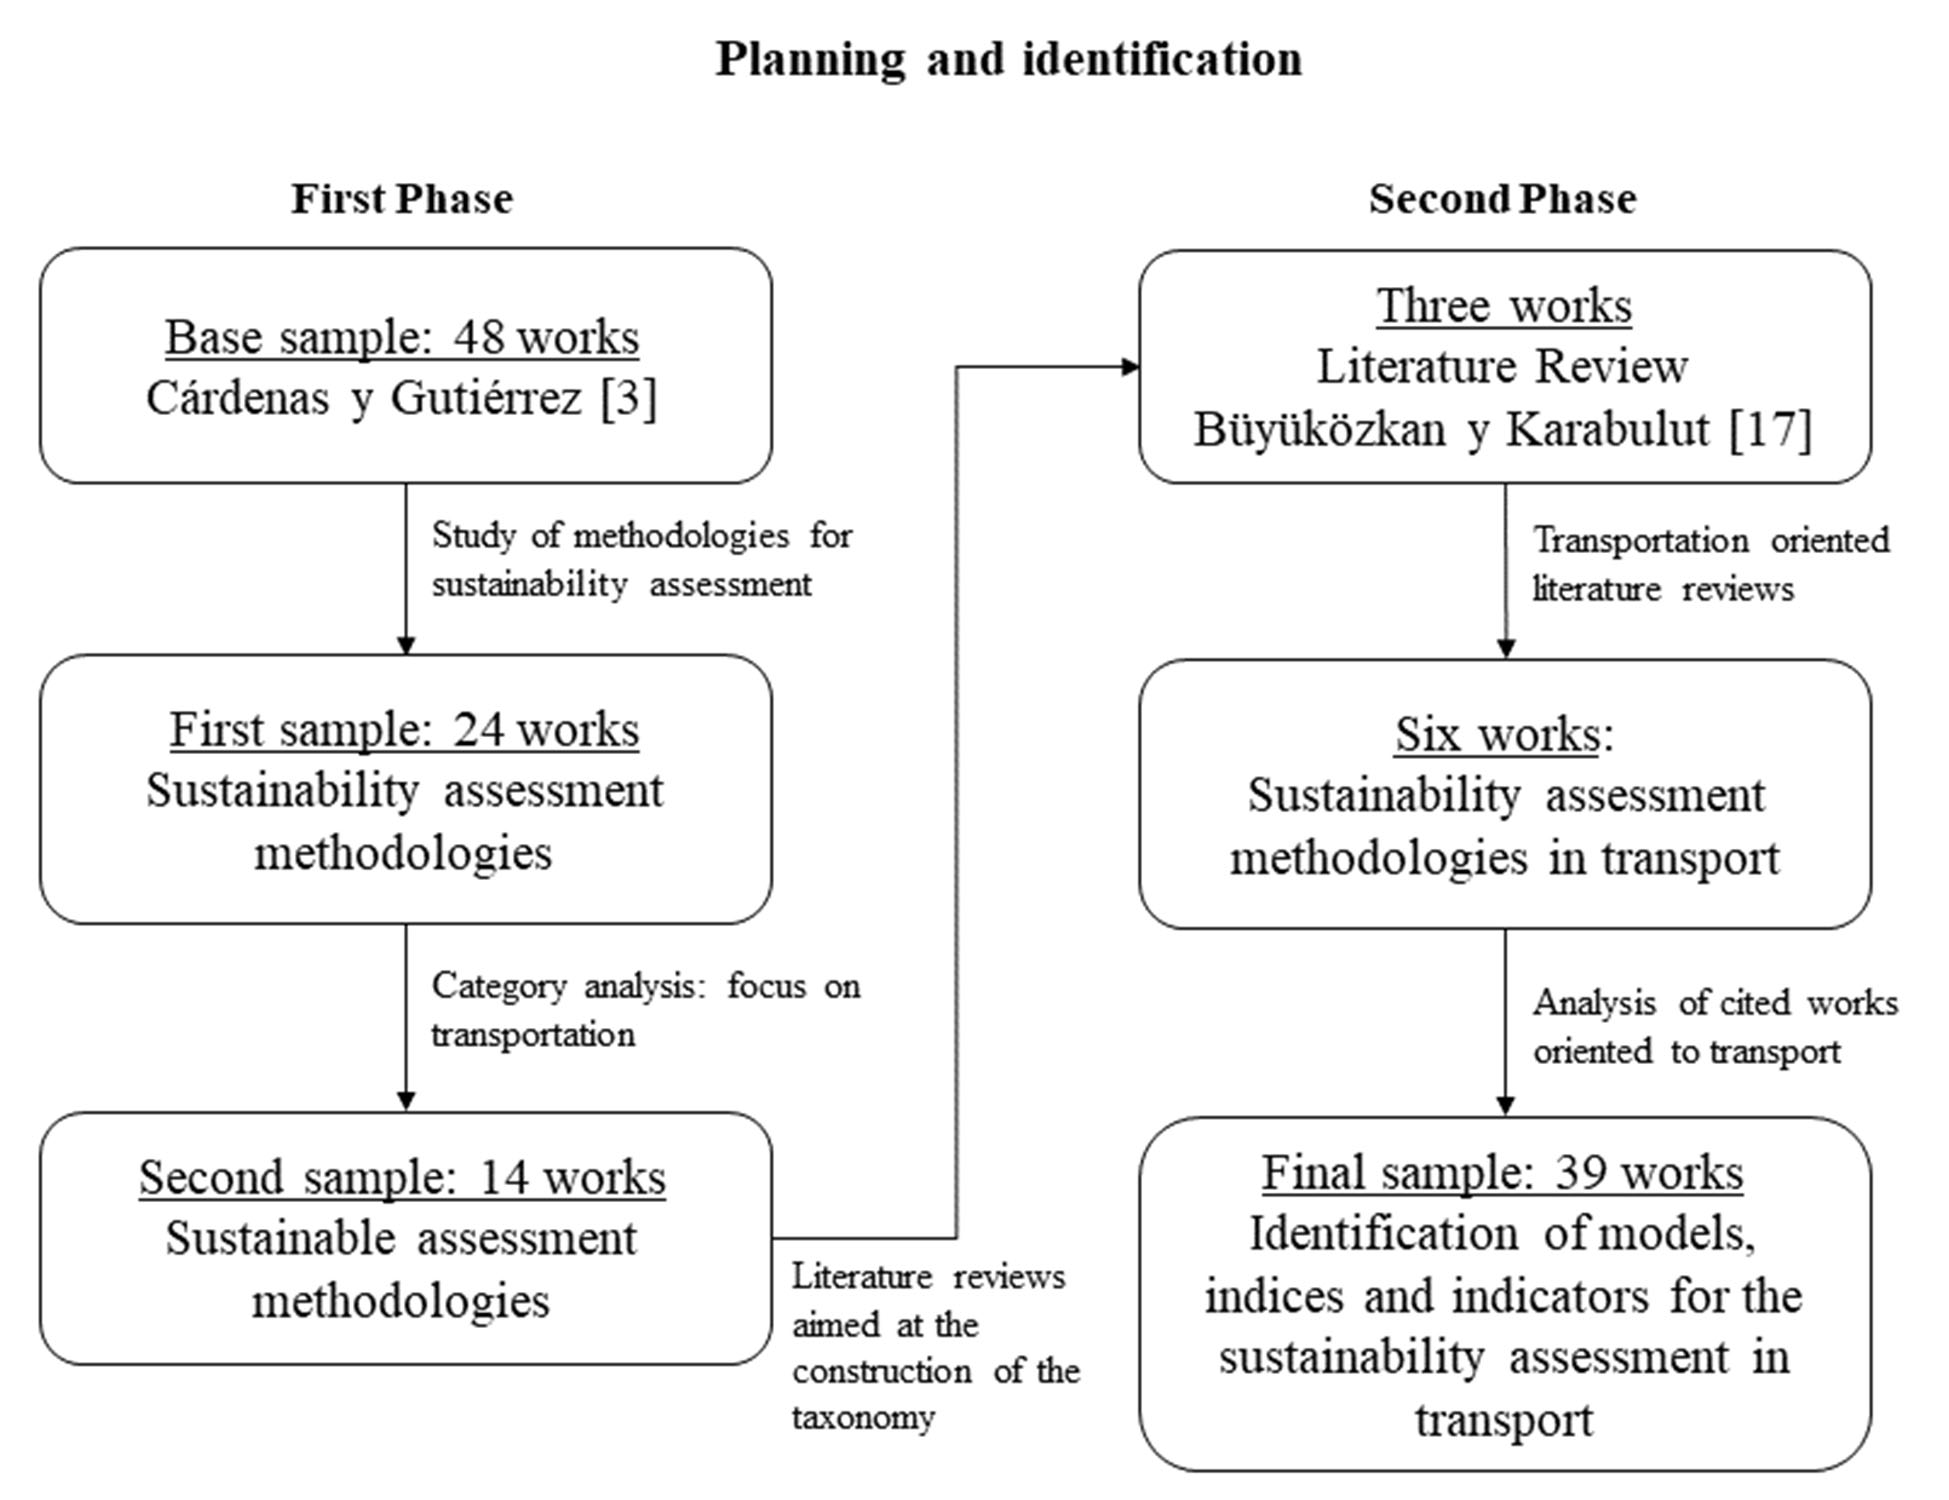 Synthesis of the first stage: planning and identification